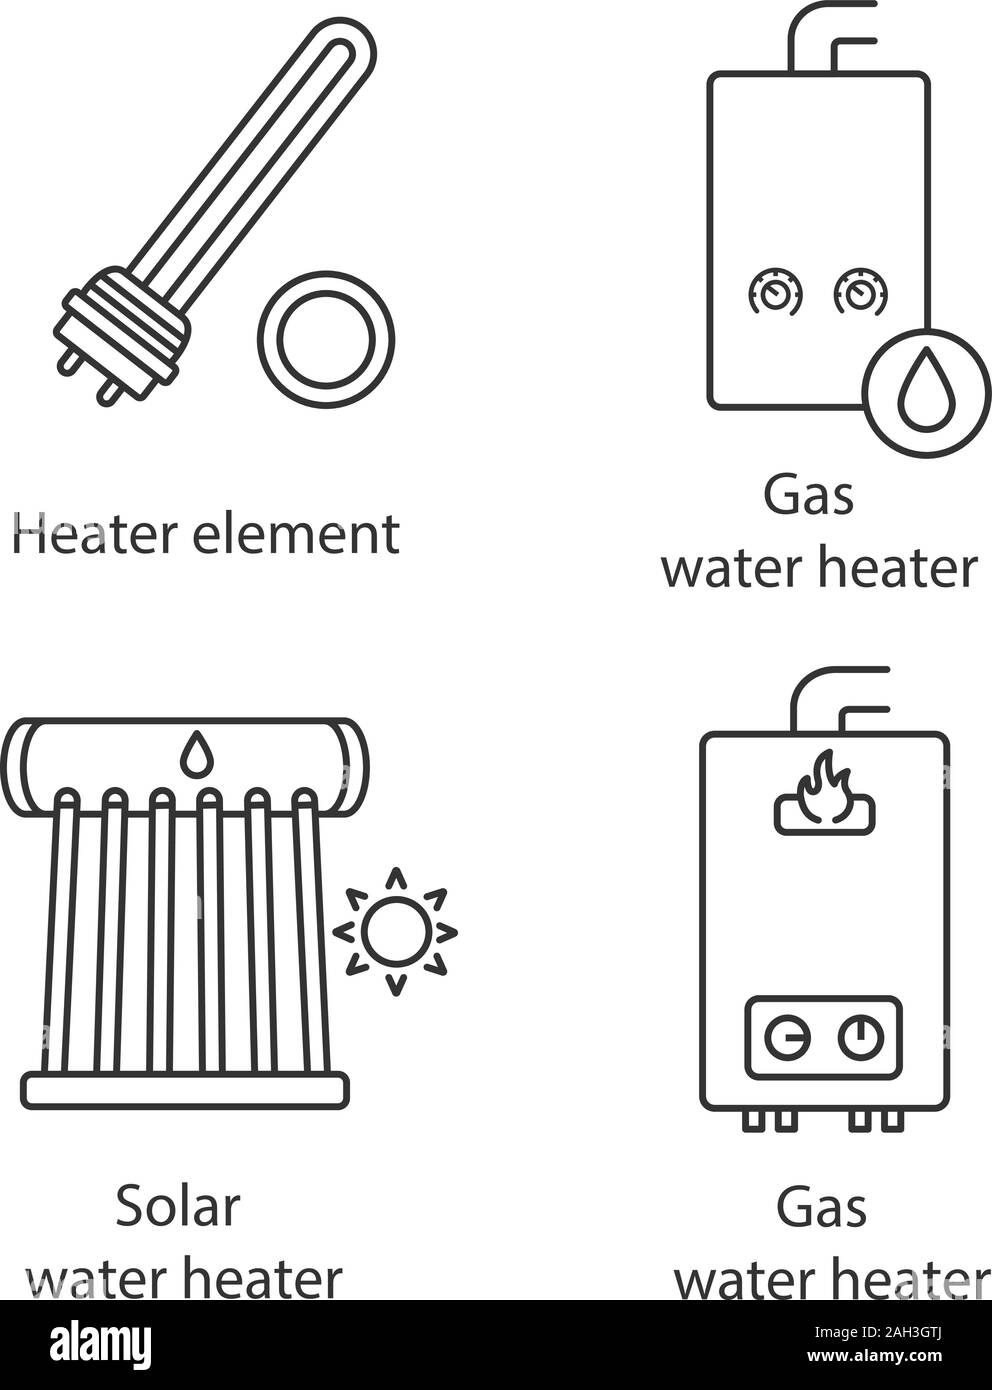 Heating linear icons set. Electric and gas water heaters, heating boiler, industrial water heater. Thin line contour symbols. Isolated vector outline Stock Vector